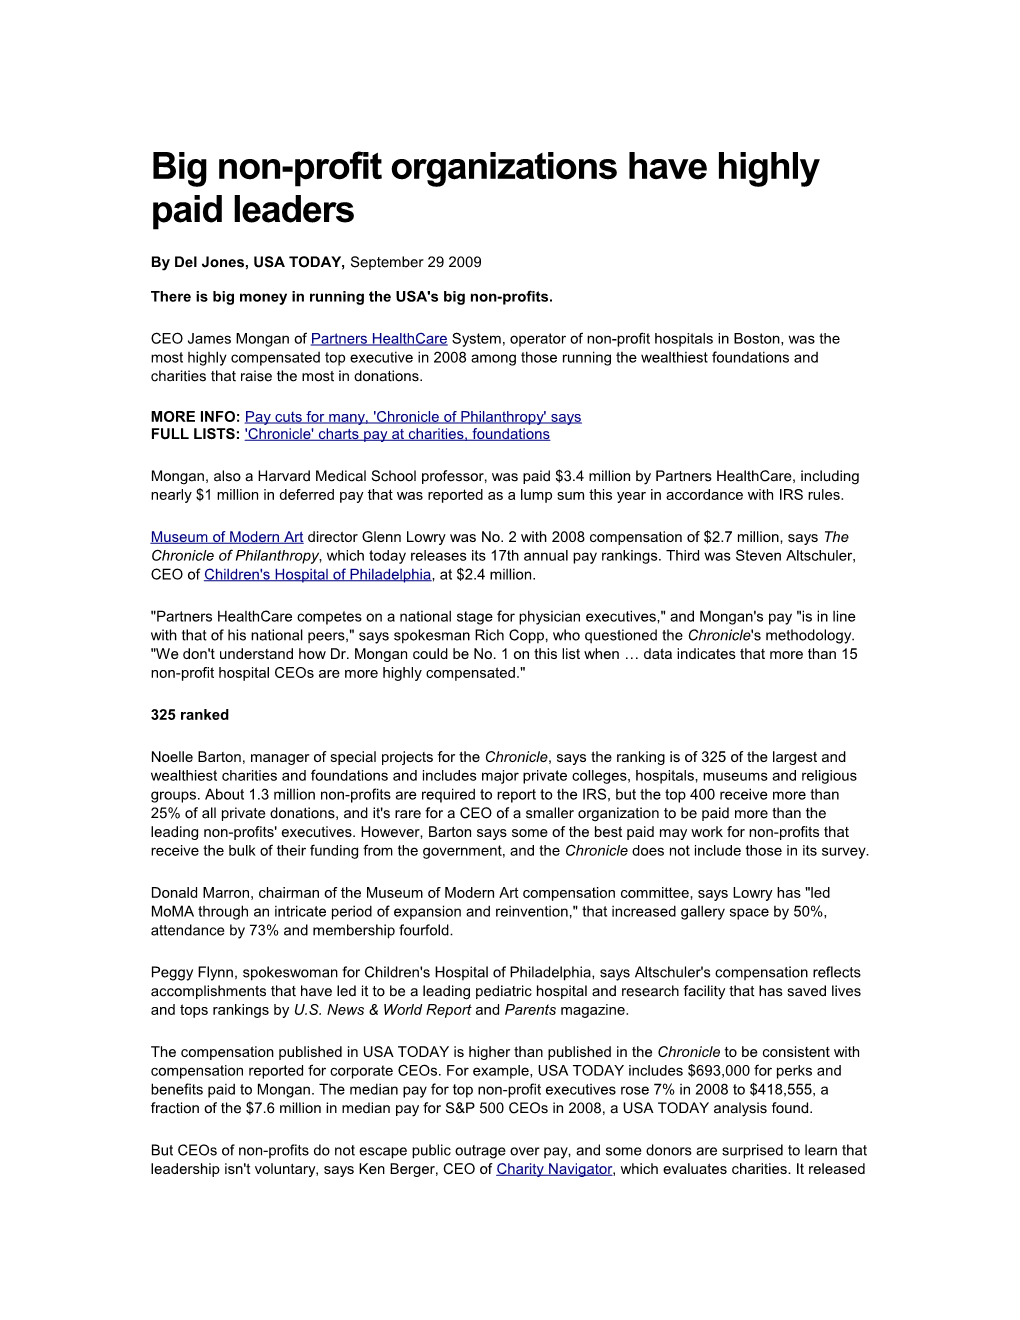 Big Non-Profit Organizations Have Highly Paid Leaders